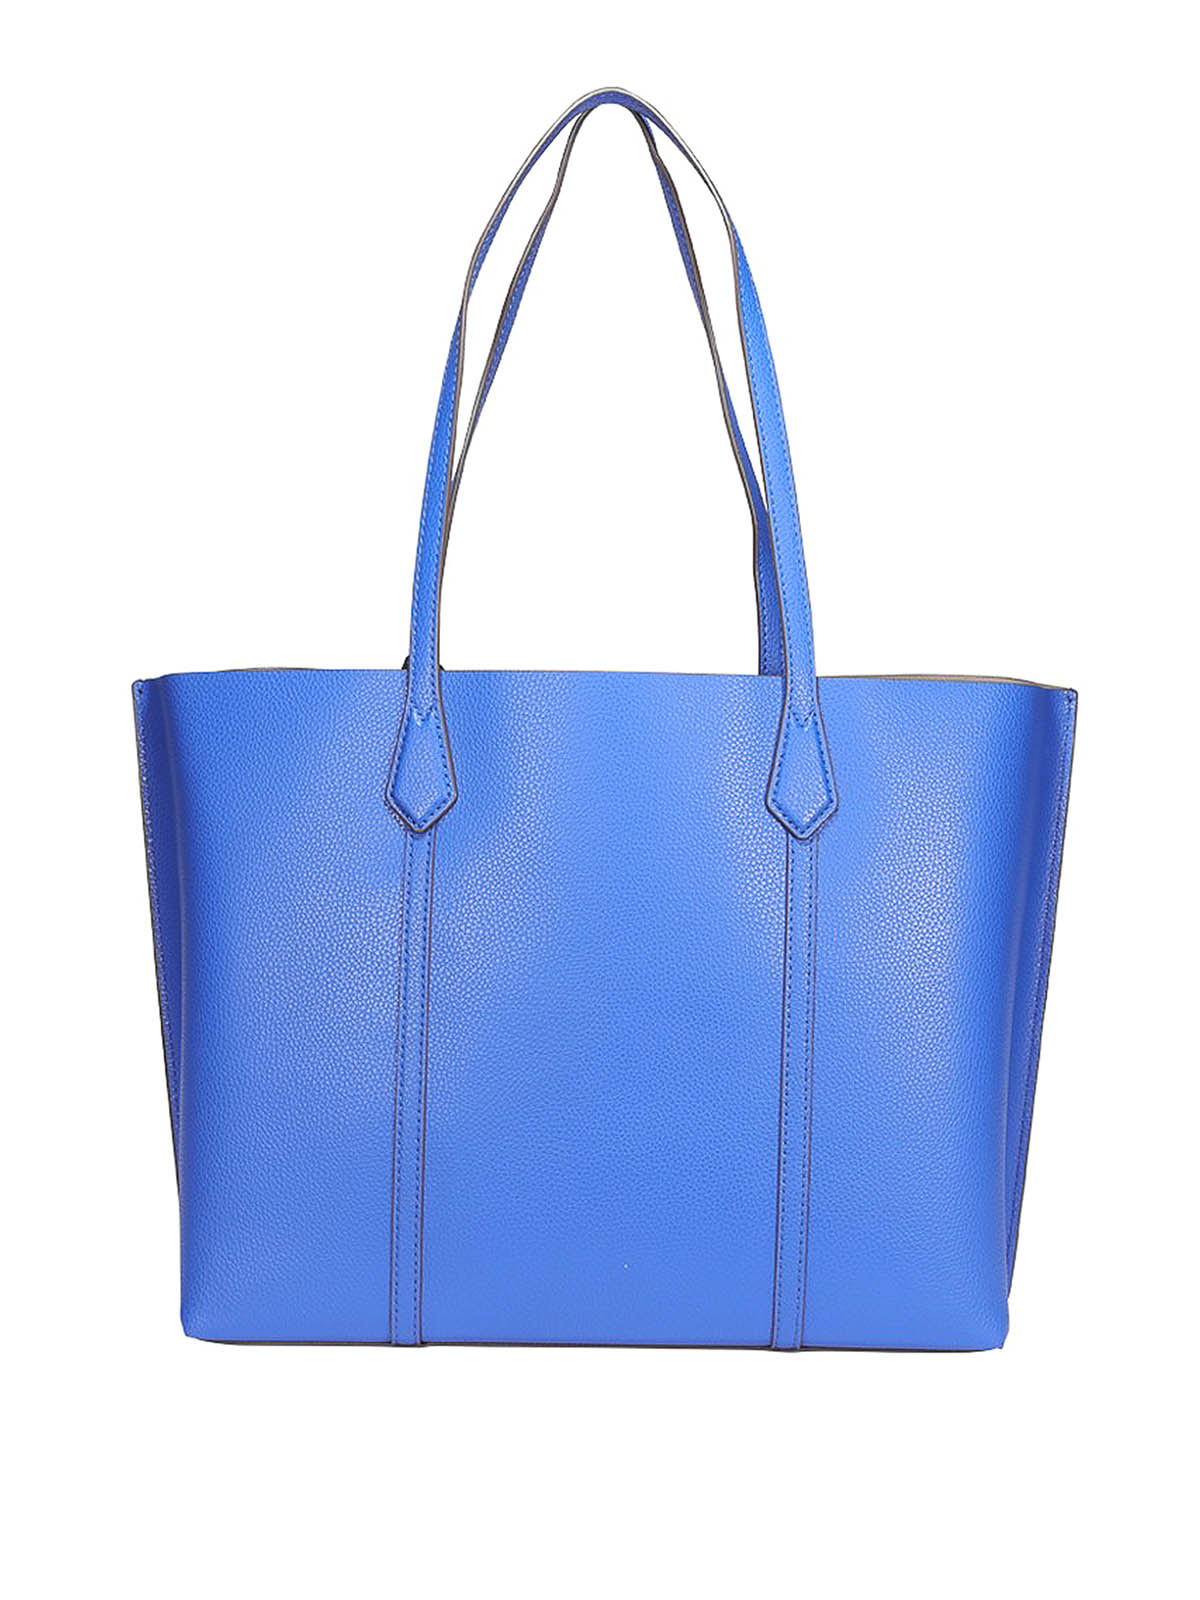 Totes bags Tory Burch - Blue grainy leather tote - 53245408 